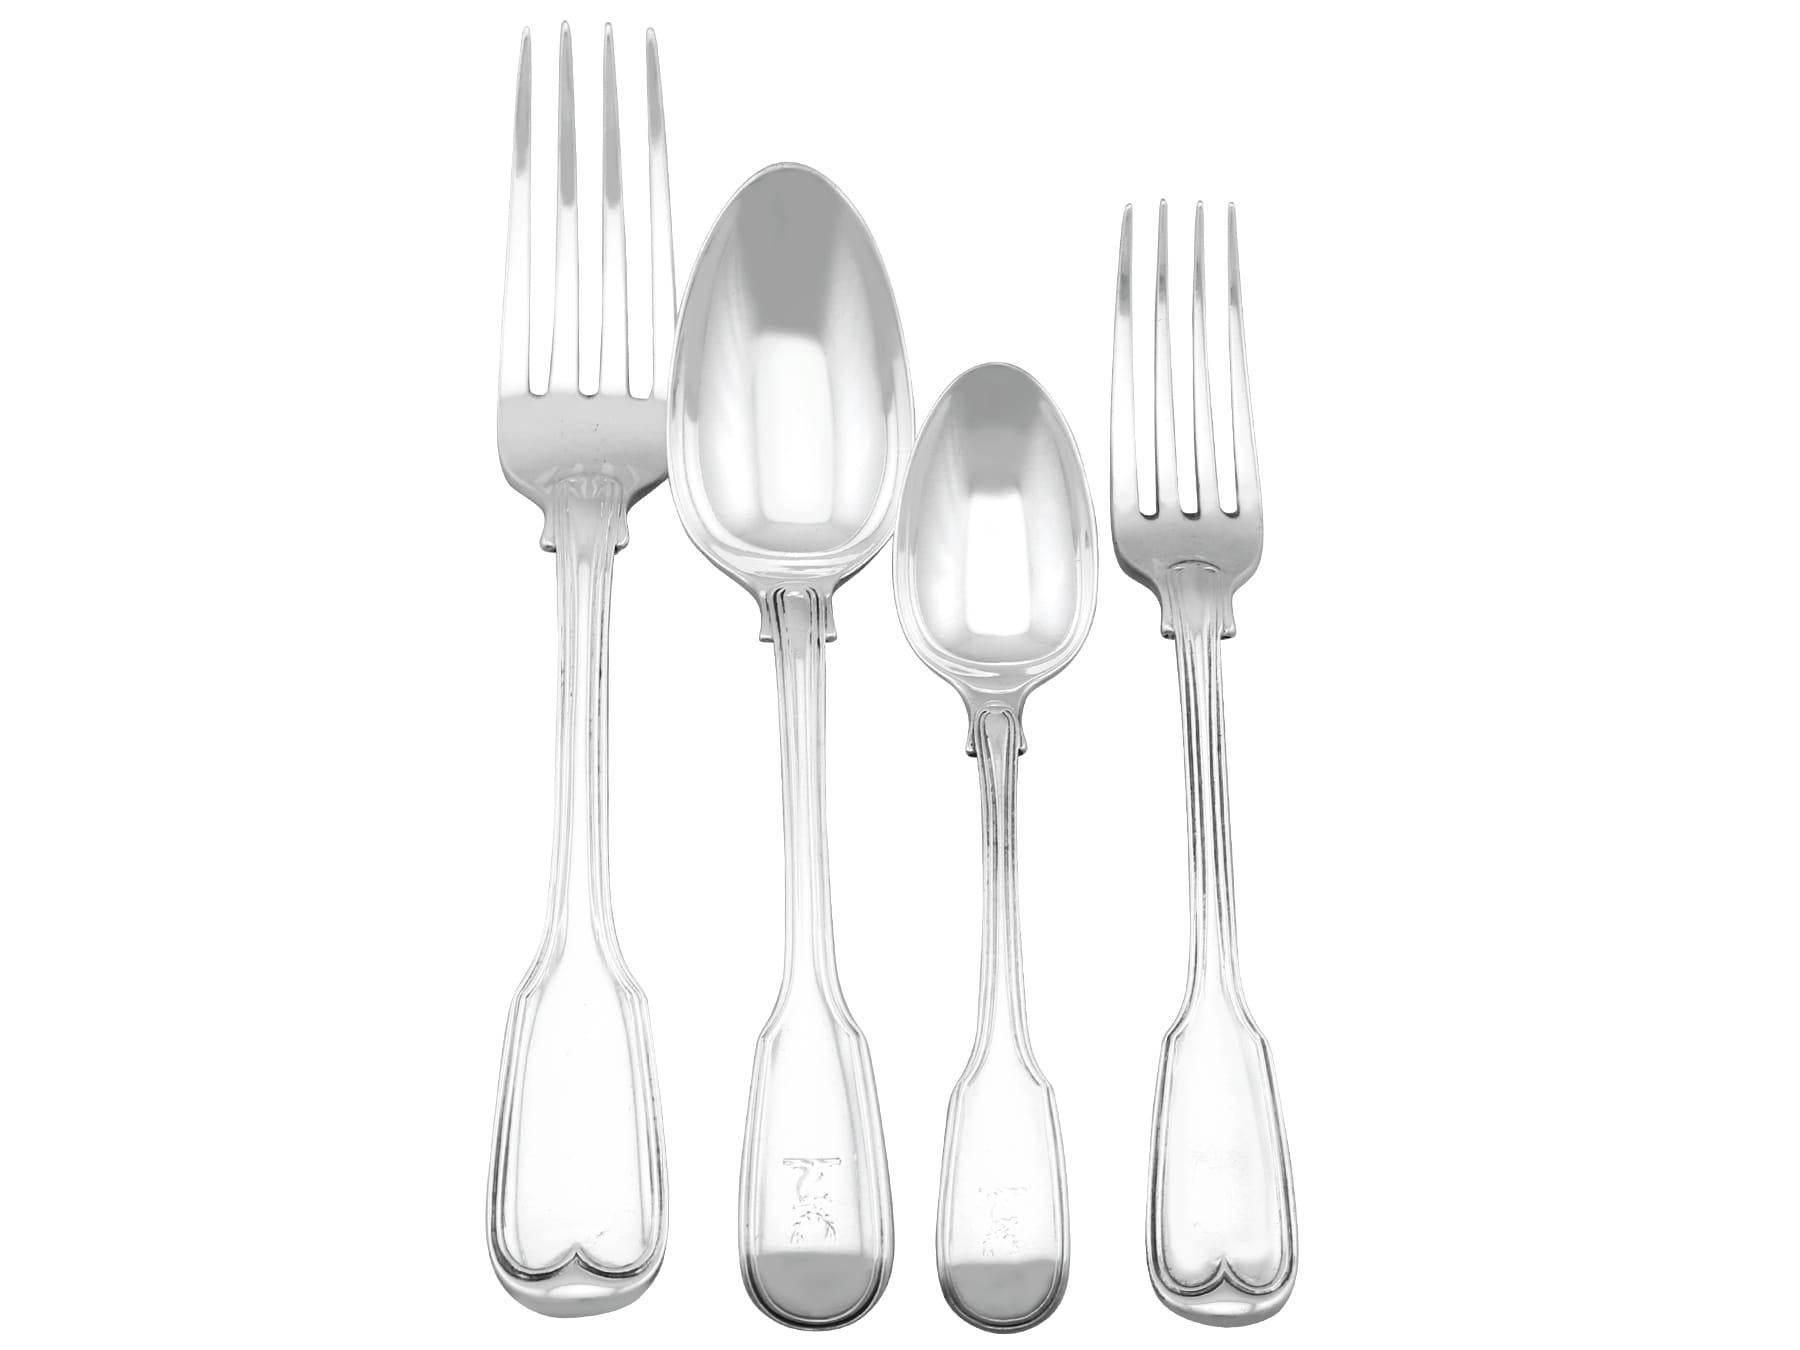 An exceptional, fine and impressive antique Victorian English sterling silver composite Fiddle & Thread pattern flatware service for 12 persons; an addition to our canteen of cutlery collection

The pieces of this exceptional, antique Victorian